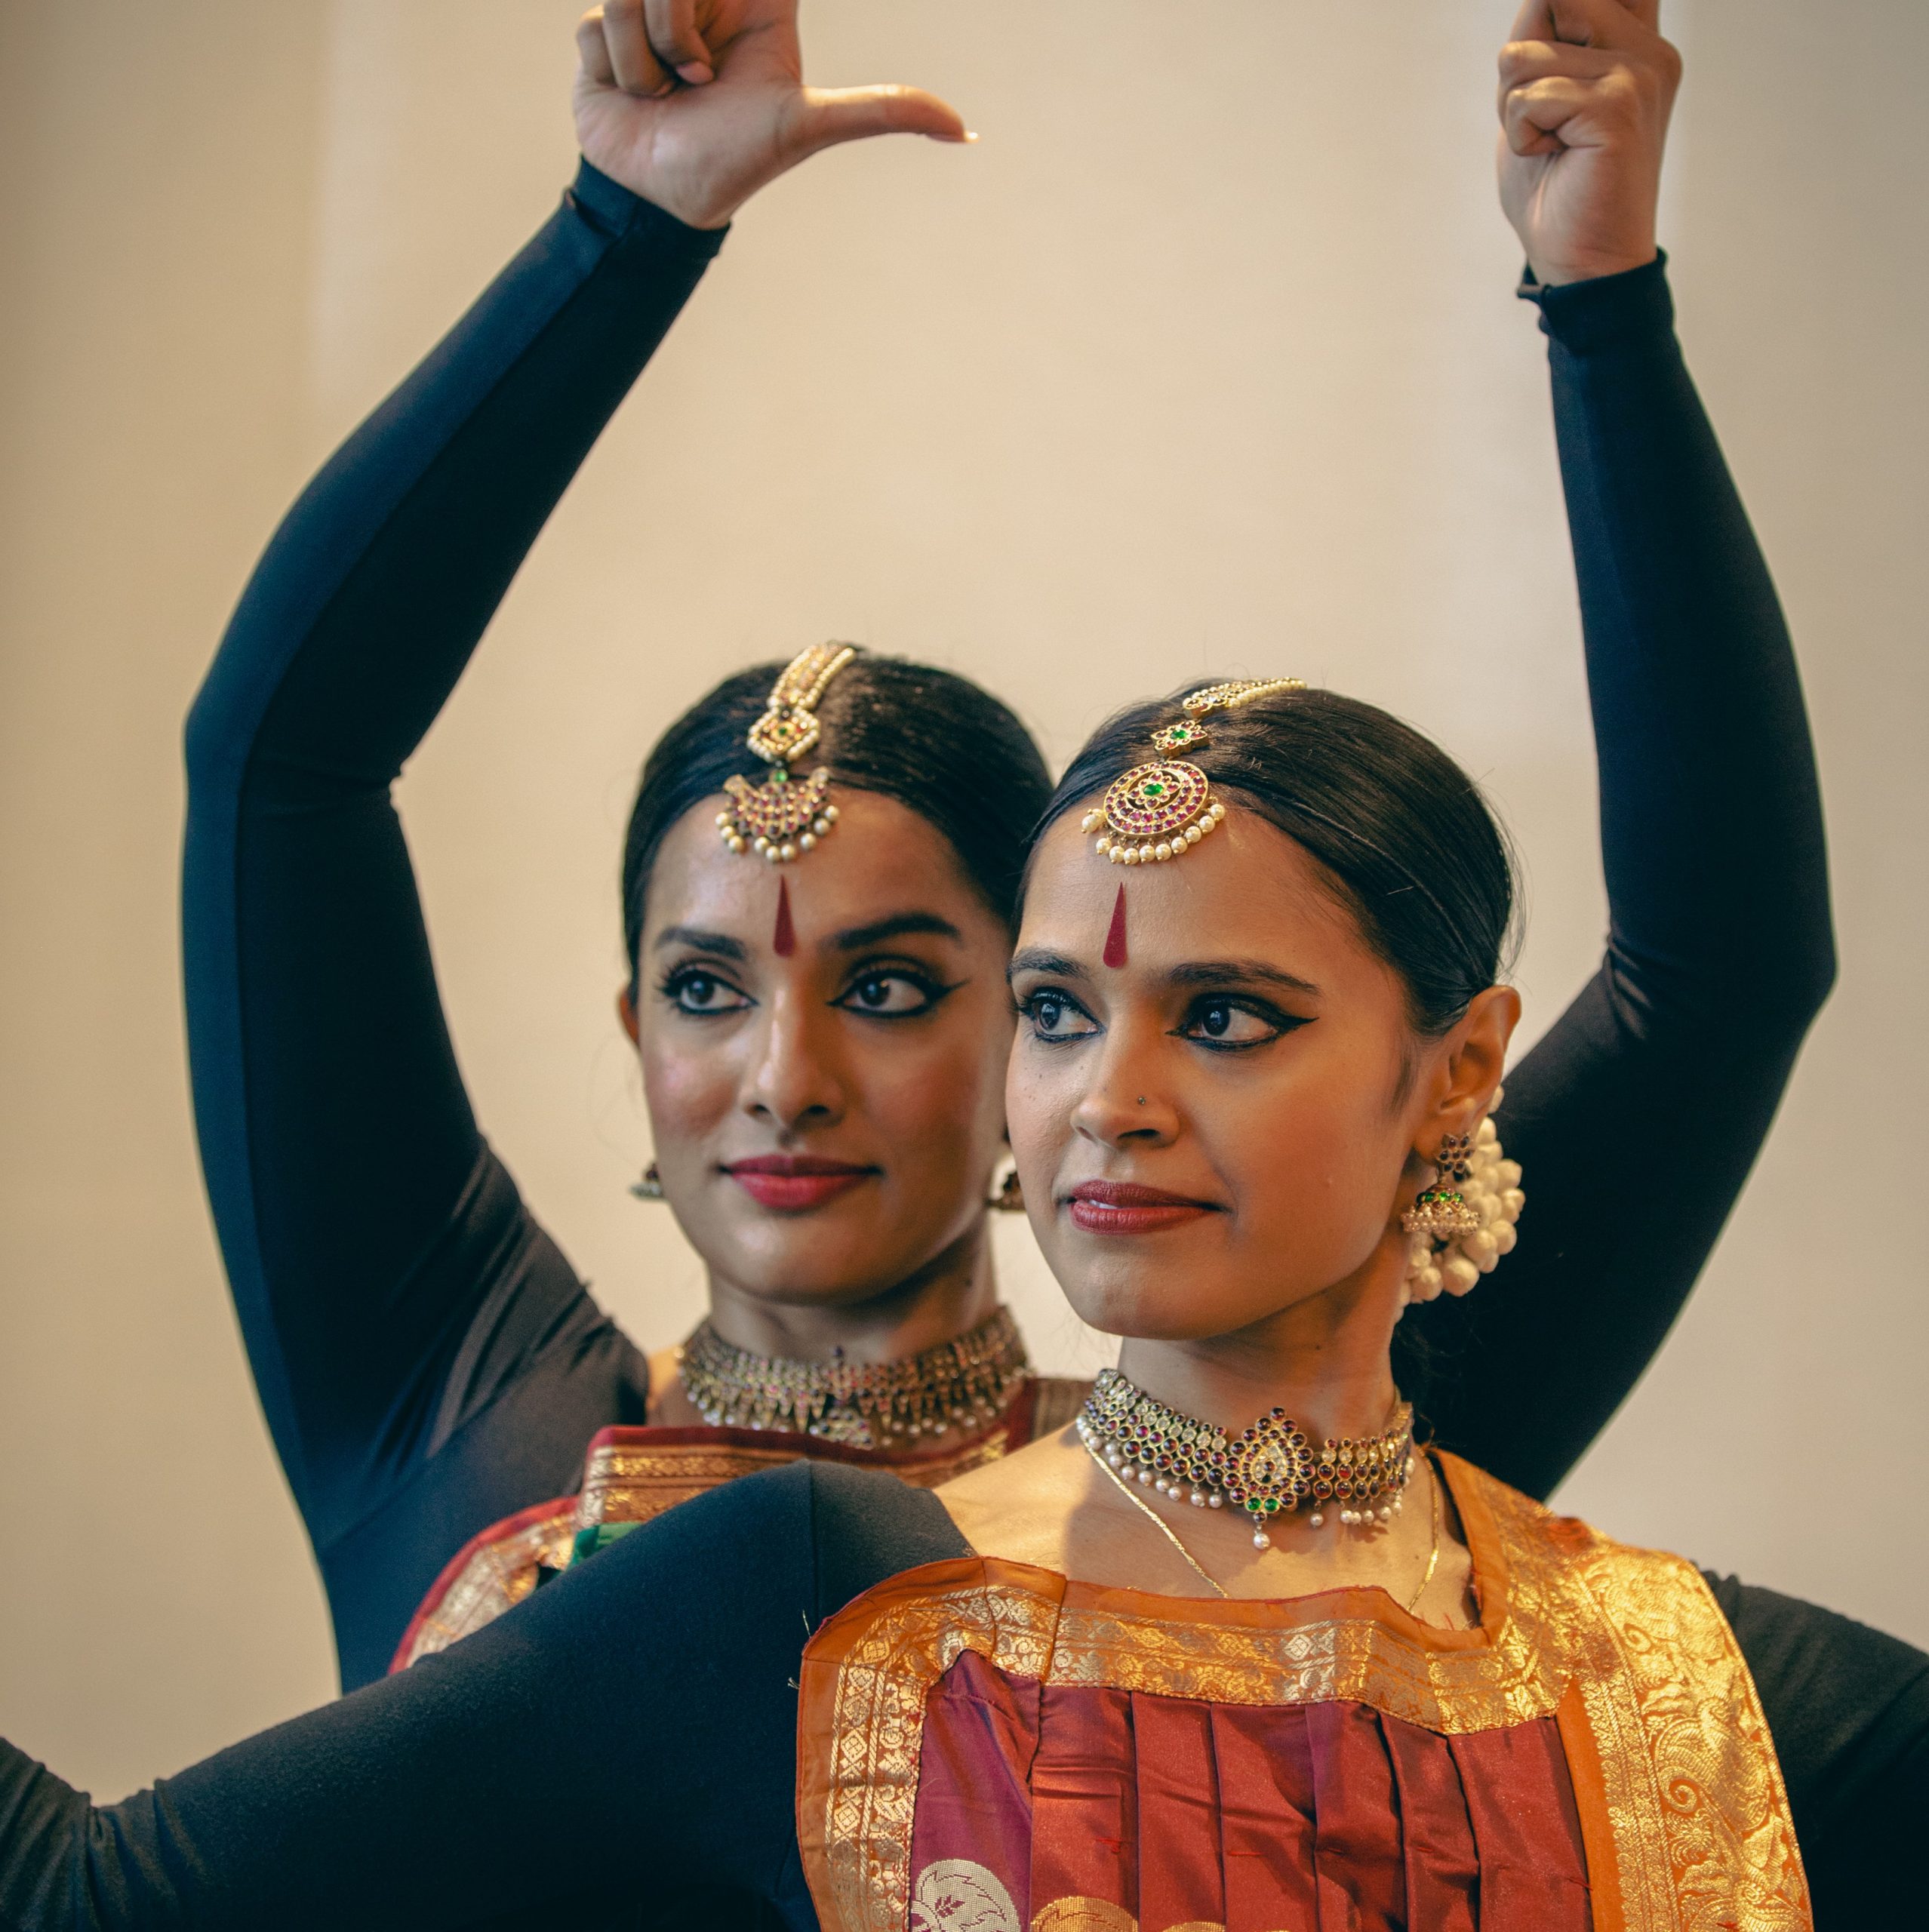 Two women in traditional bharatanatyam clothing, hair, makeup and jewelry pose for the camera. The woman in the back has her arms raised with thumbs pointing out.